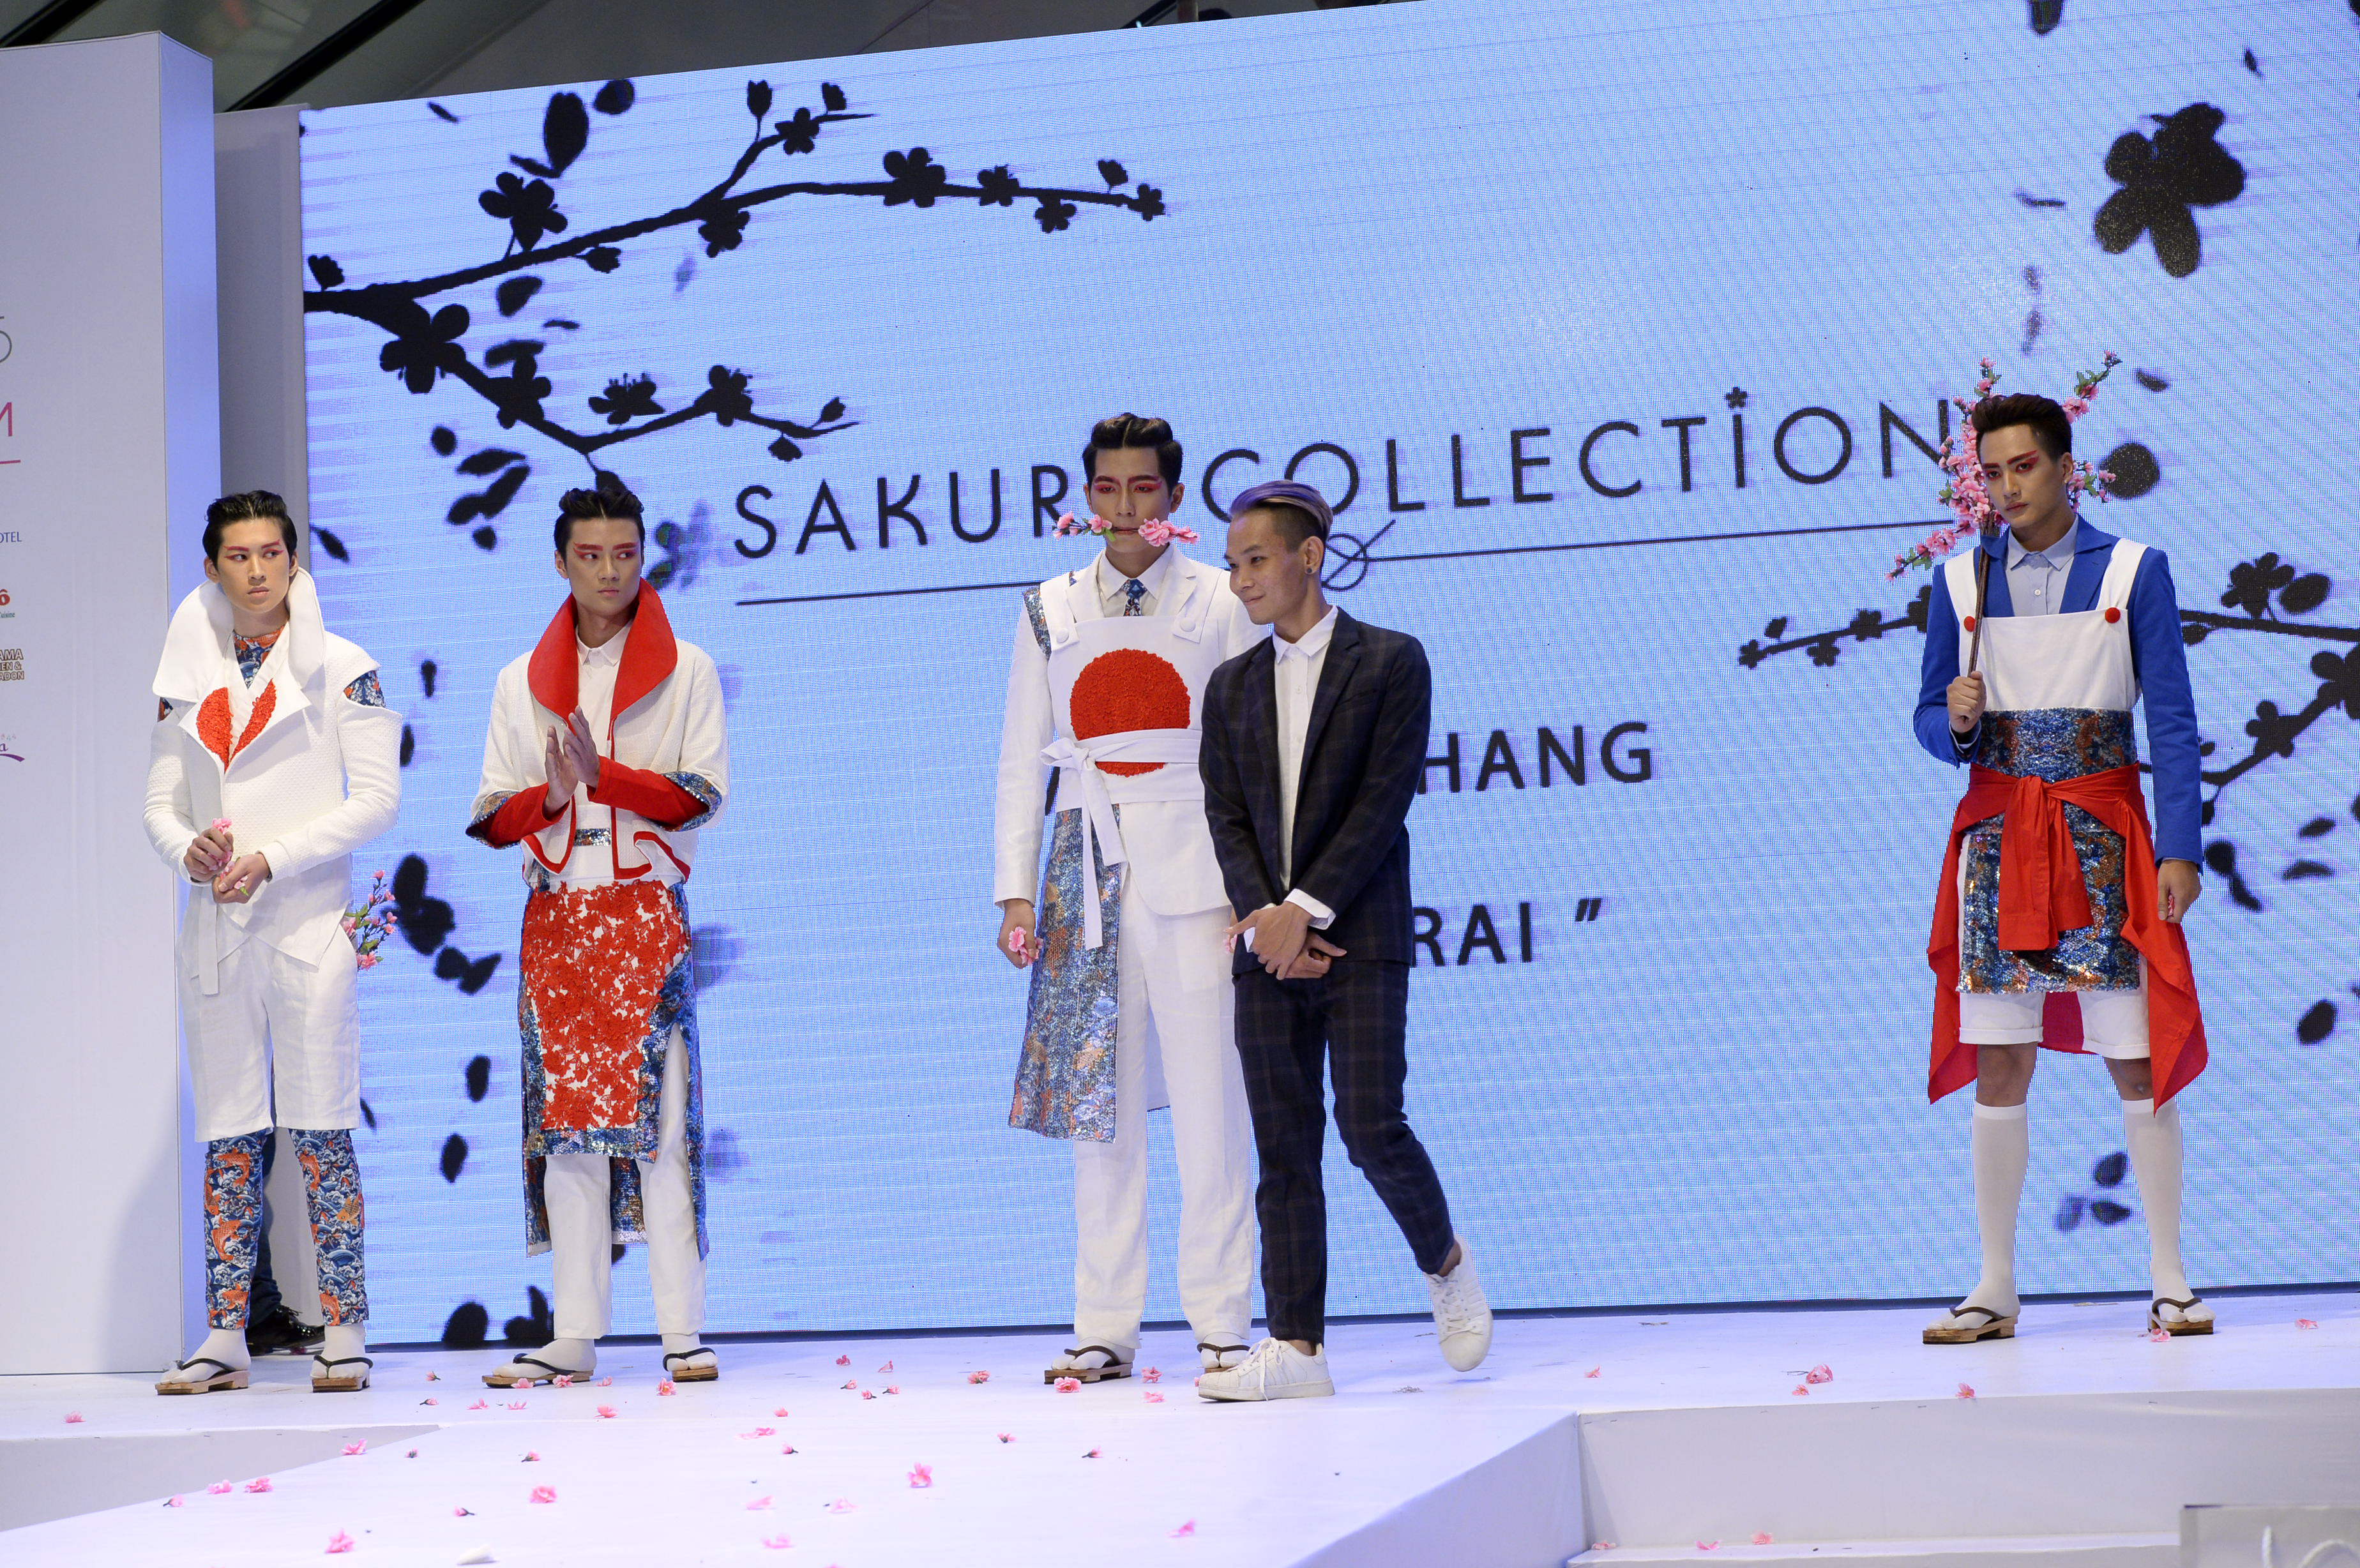 HUTECH student named as Champion the 2015’s Sakura Collection competition. 74